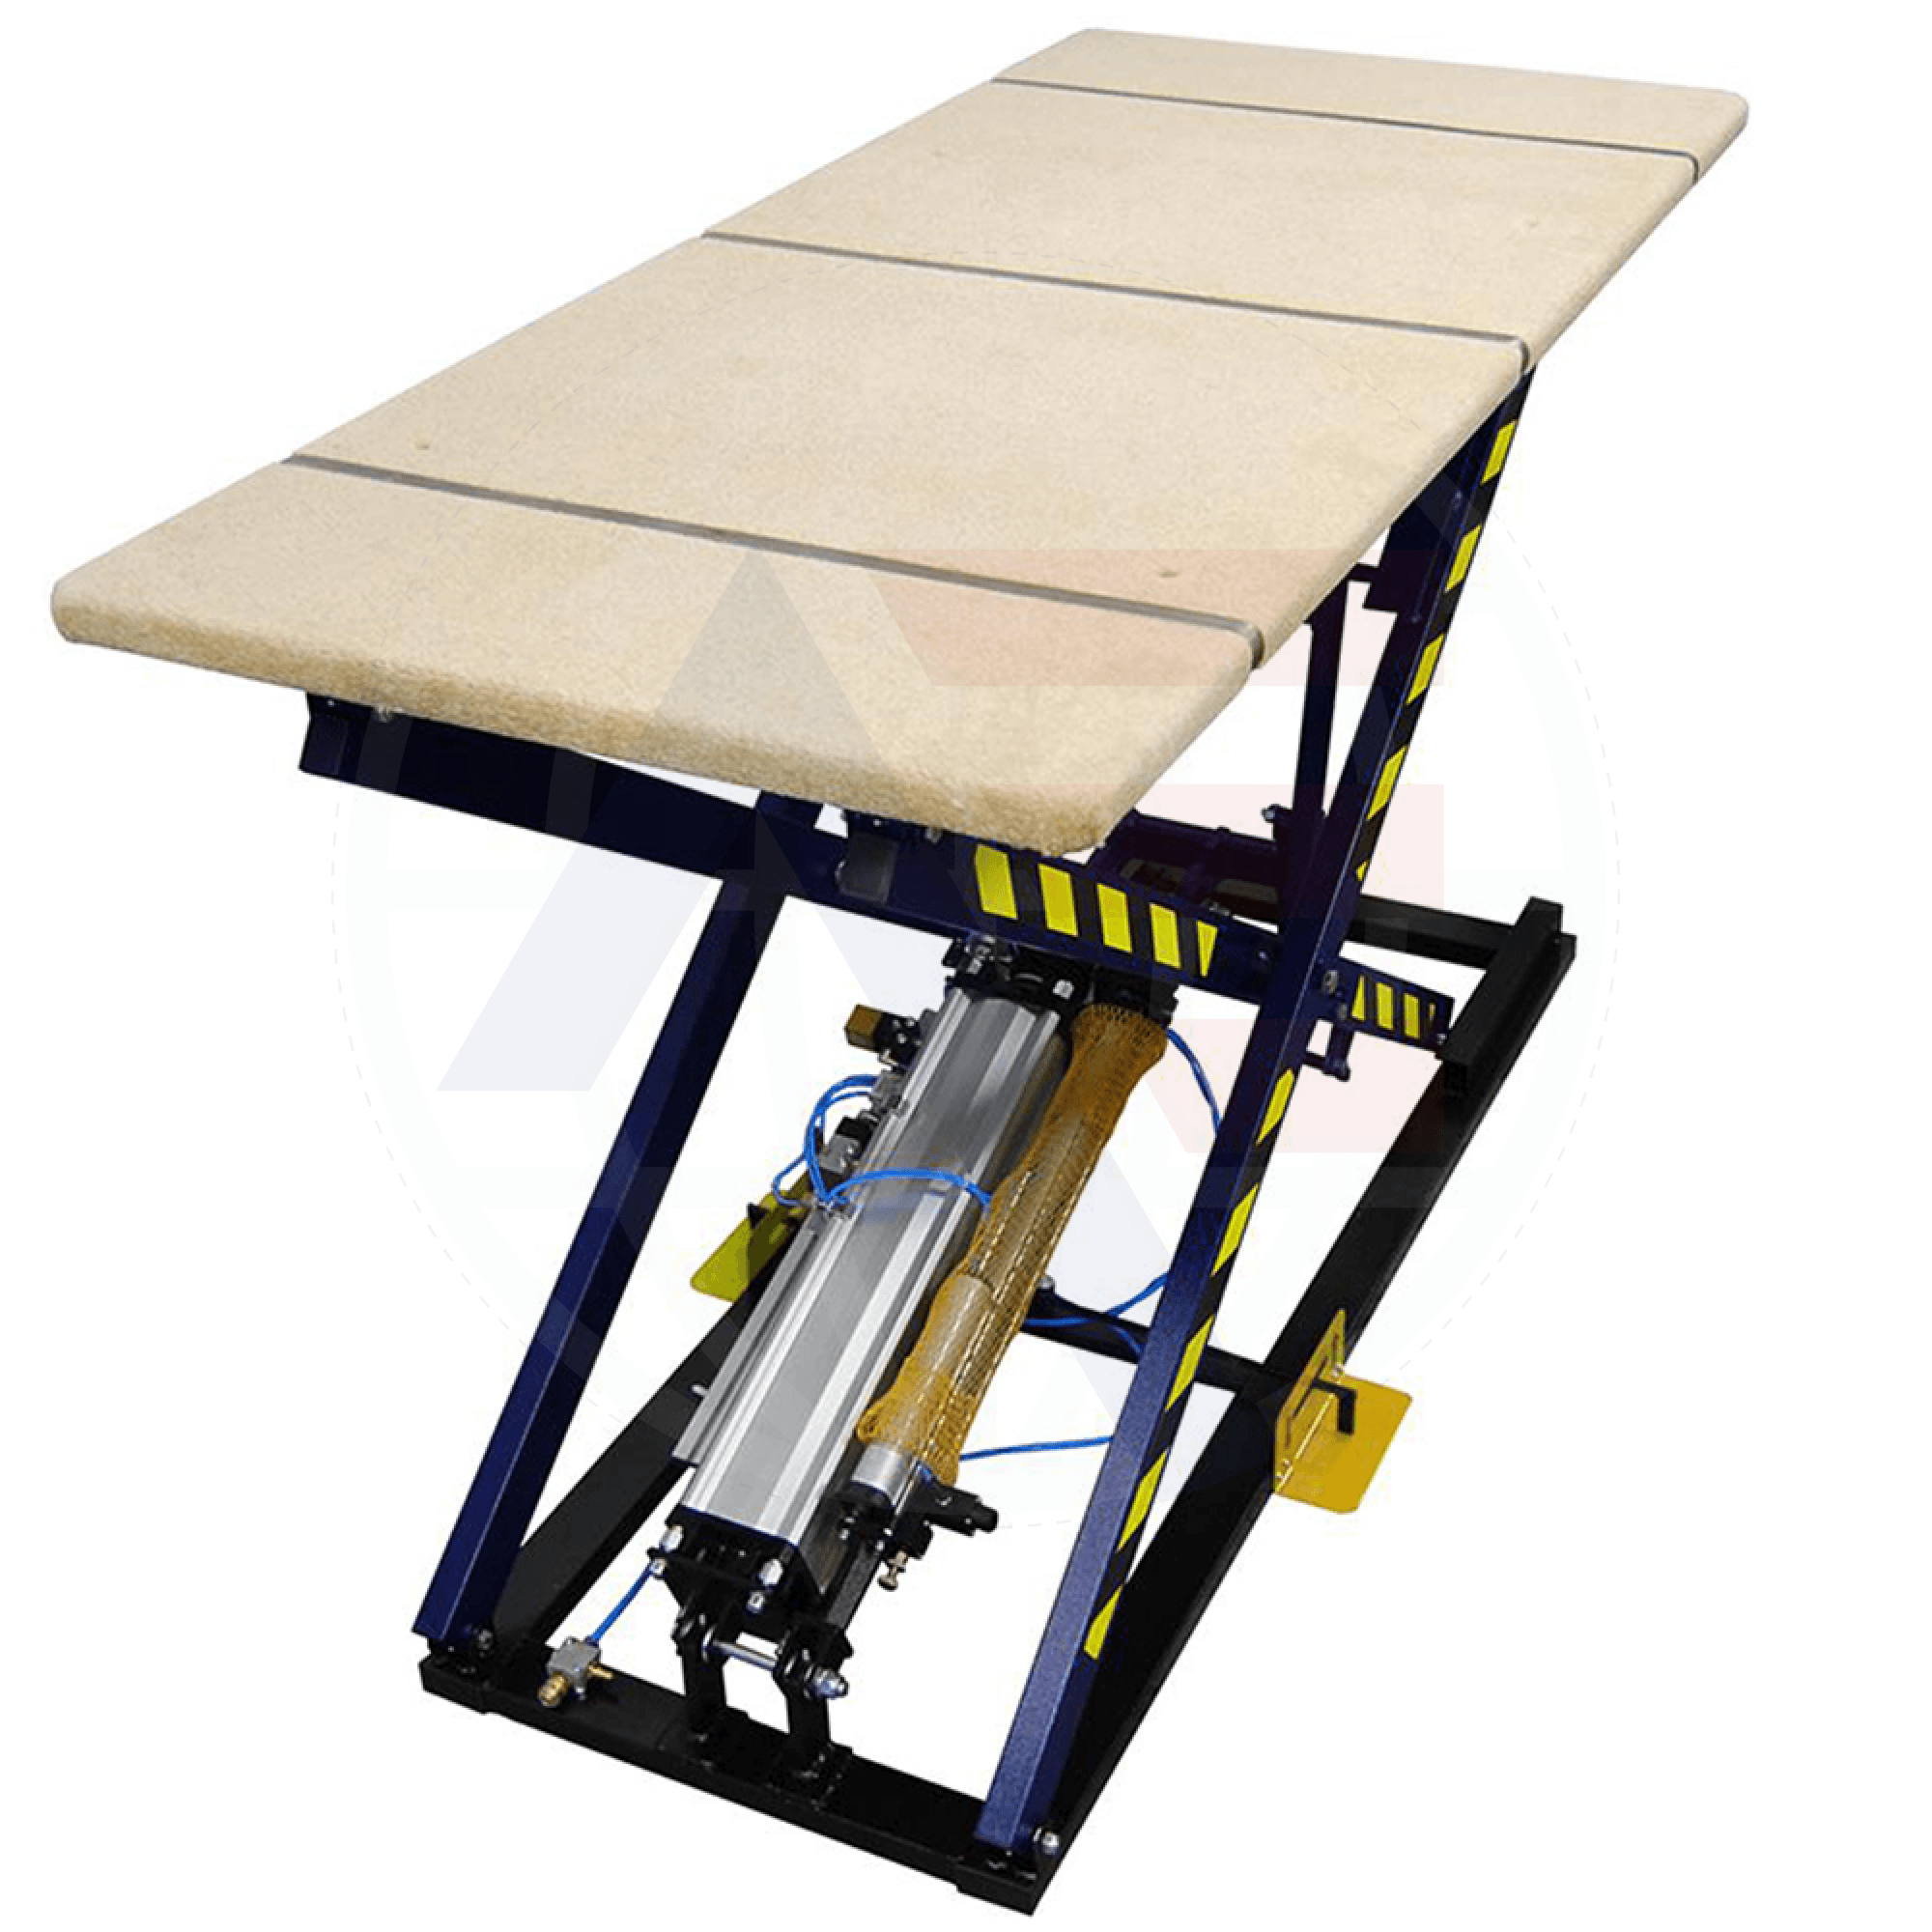 Rexel St-3/kp Pneumatic Lifting Table Tables